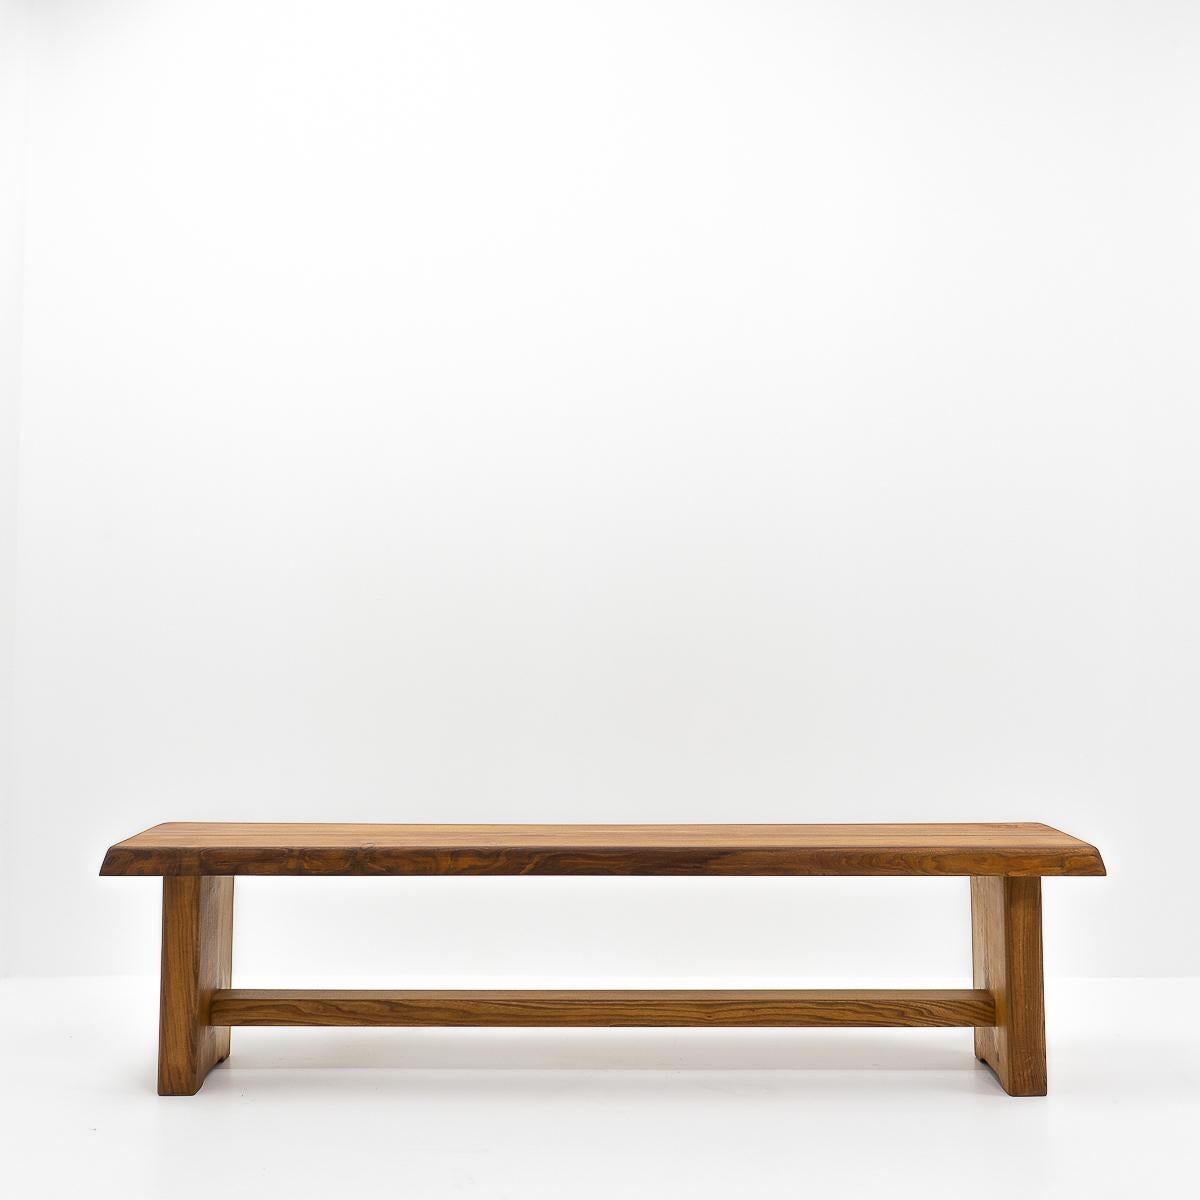 French Design Classic: Pierre Chapo, S14 Benches, 1980s For Sale 2